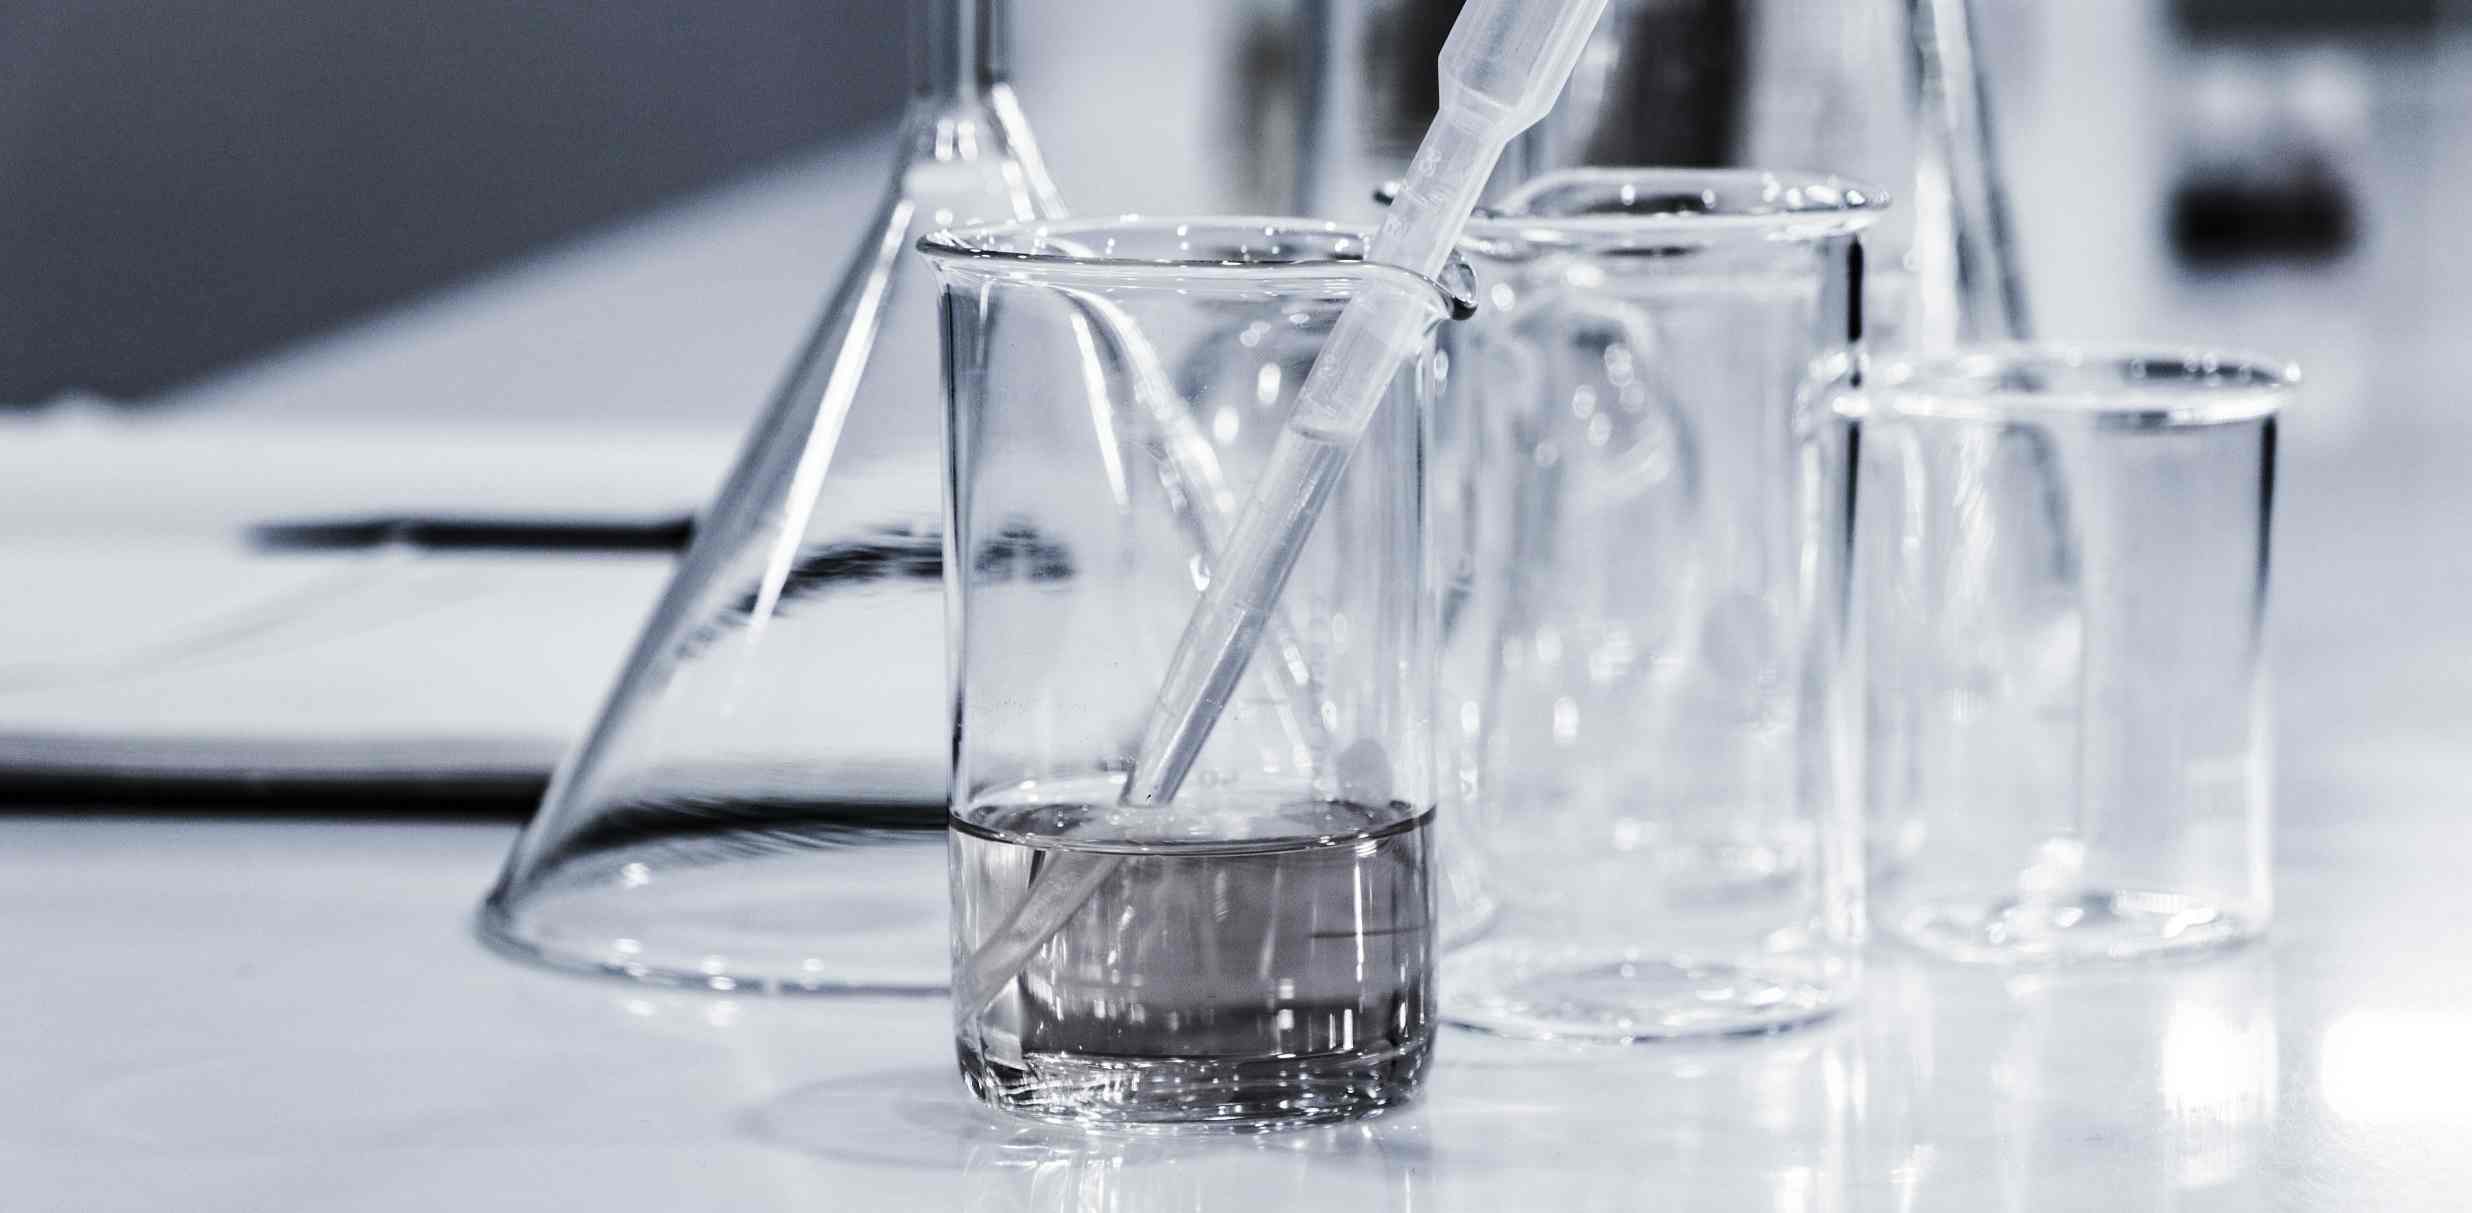 laboratory glass jars on a white table